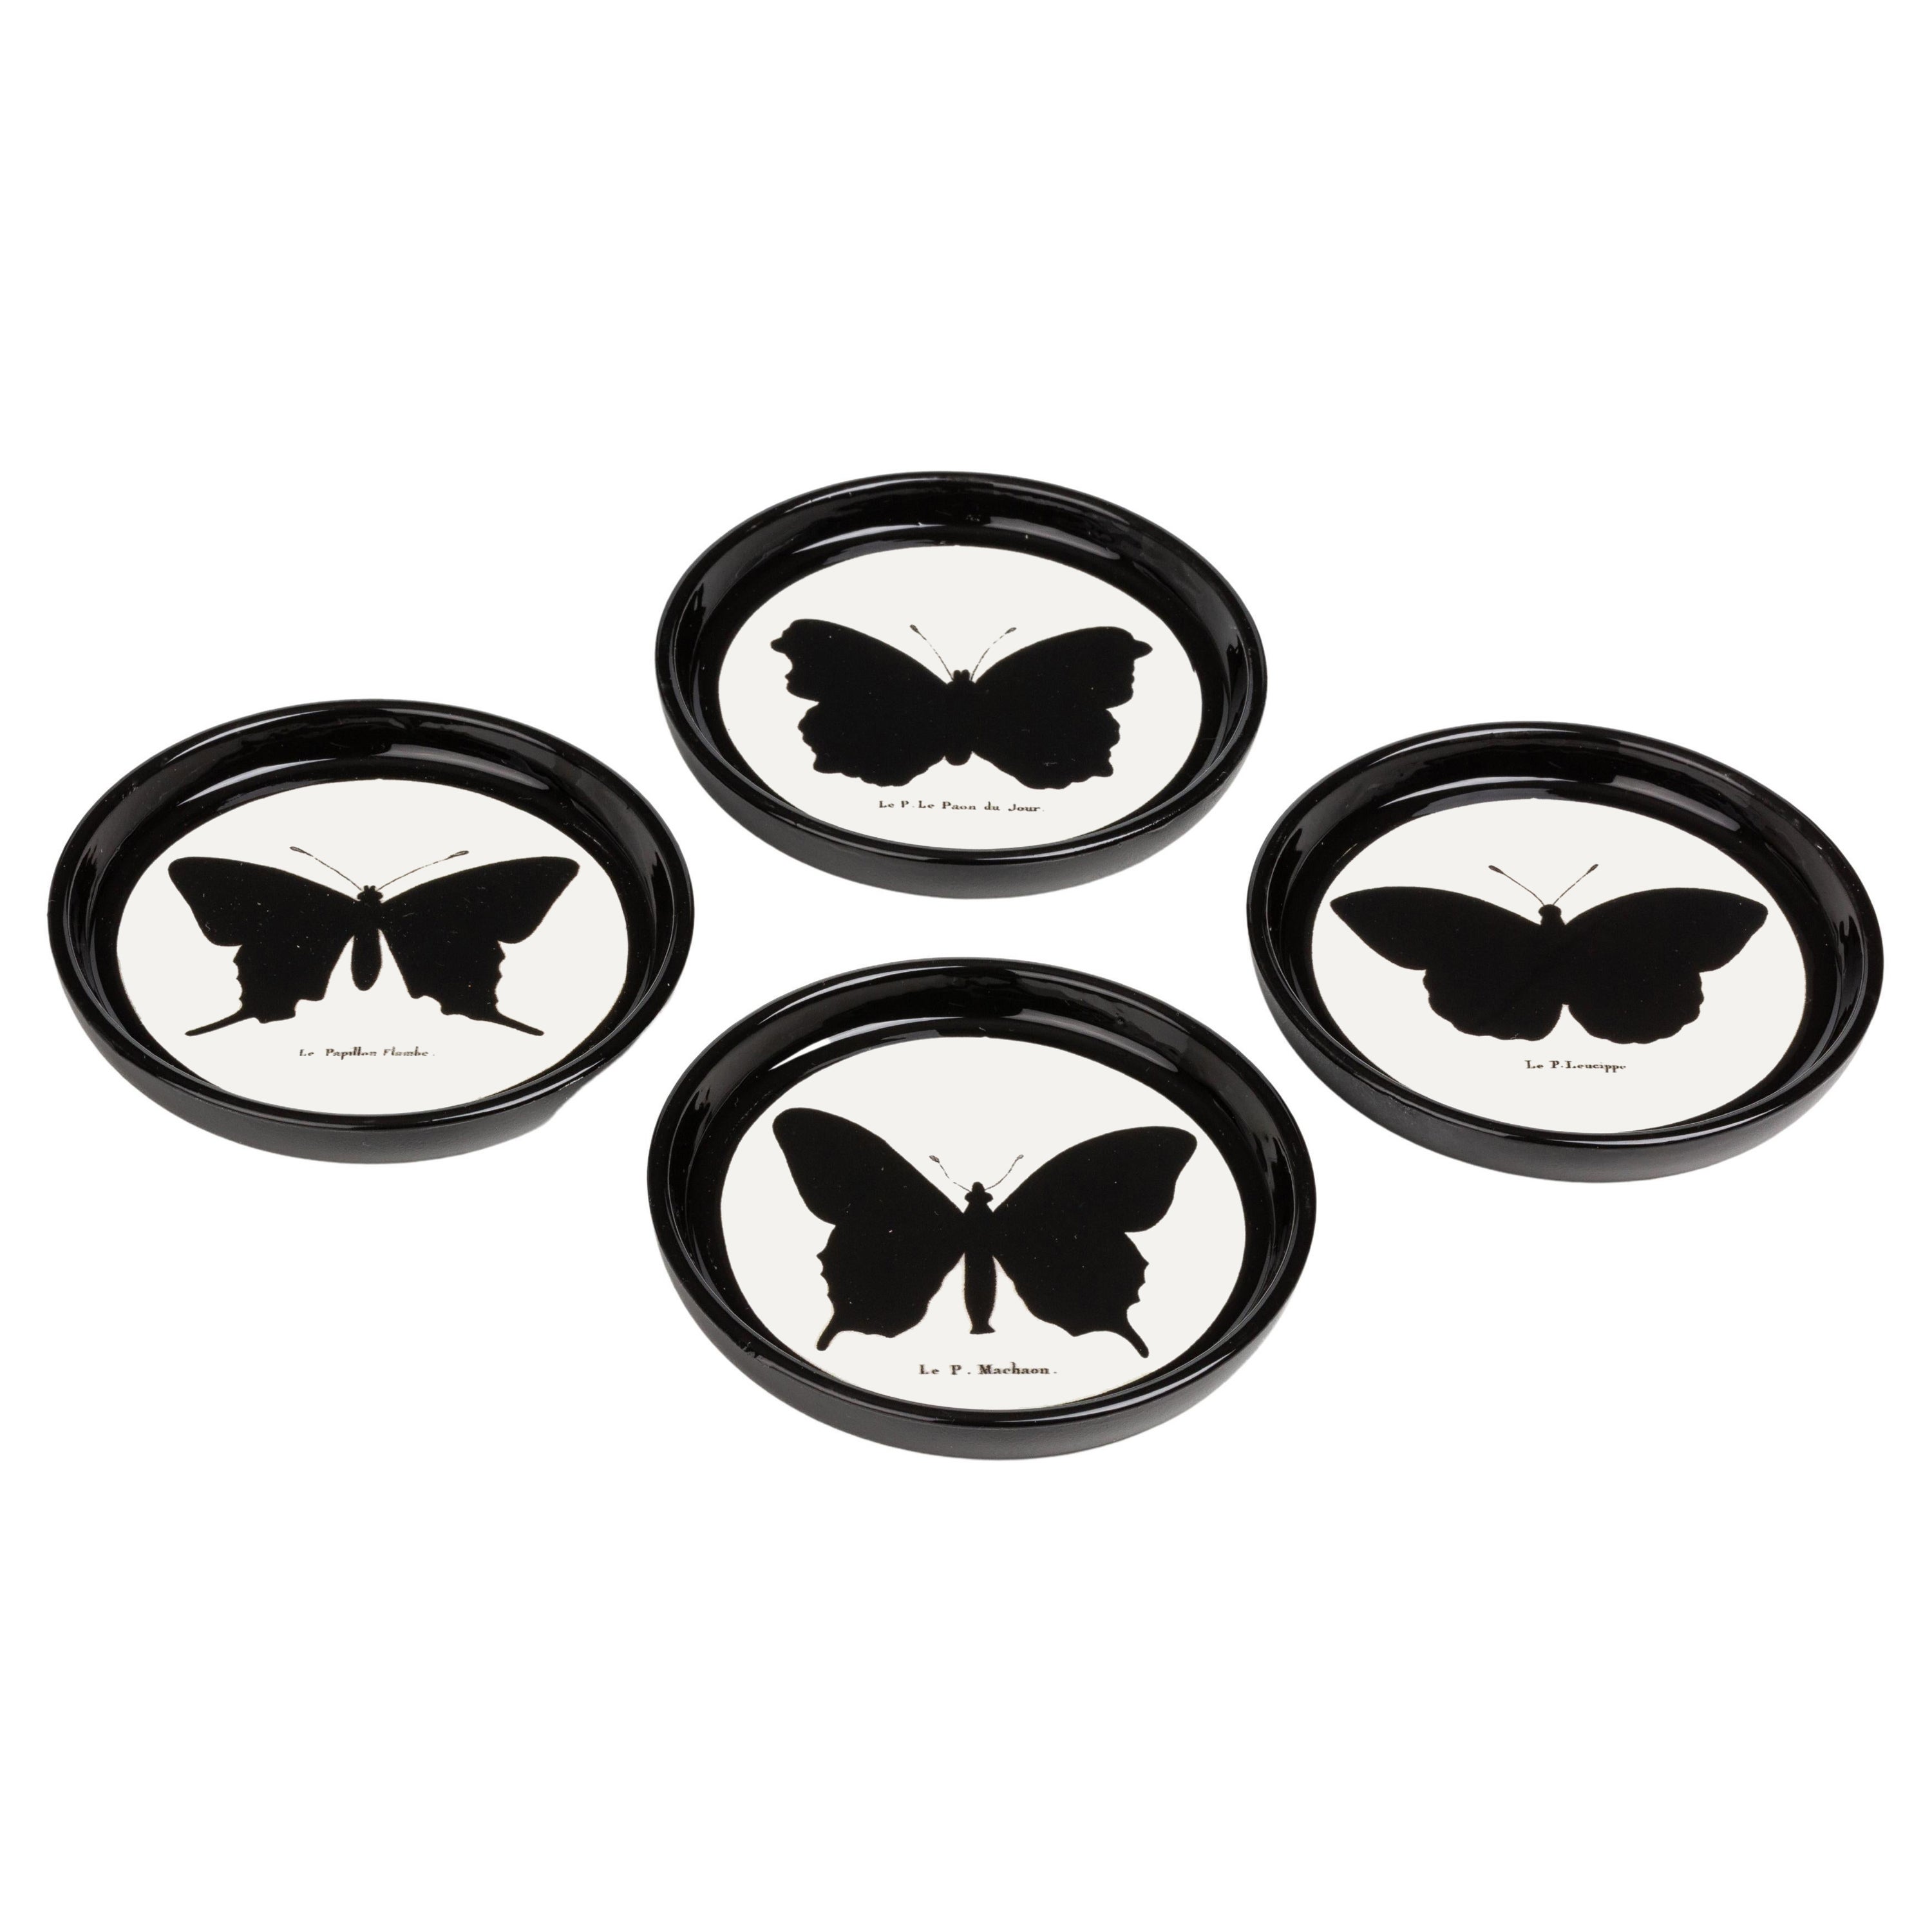 Italian Contemporary "Black and Wild" Butterfly Resin Coasters Set of 4 For Sale